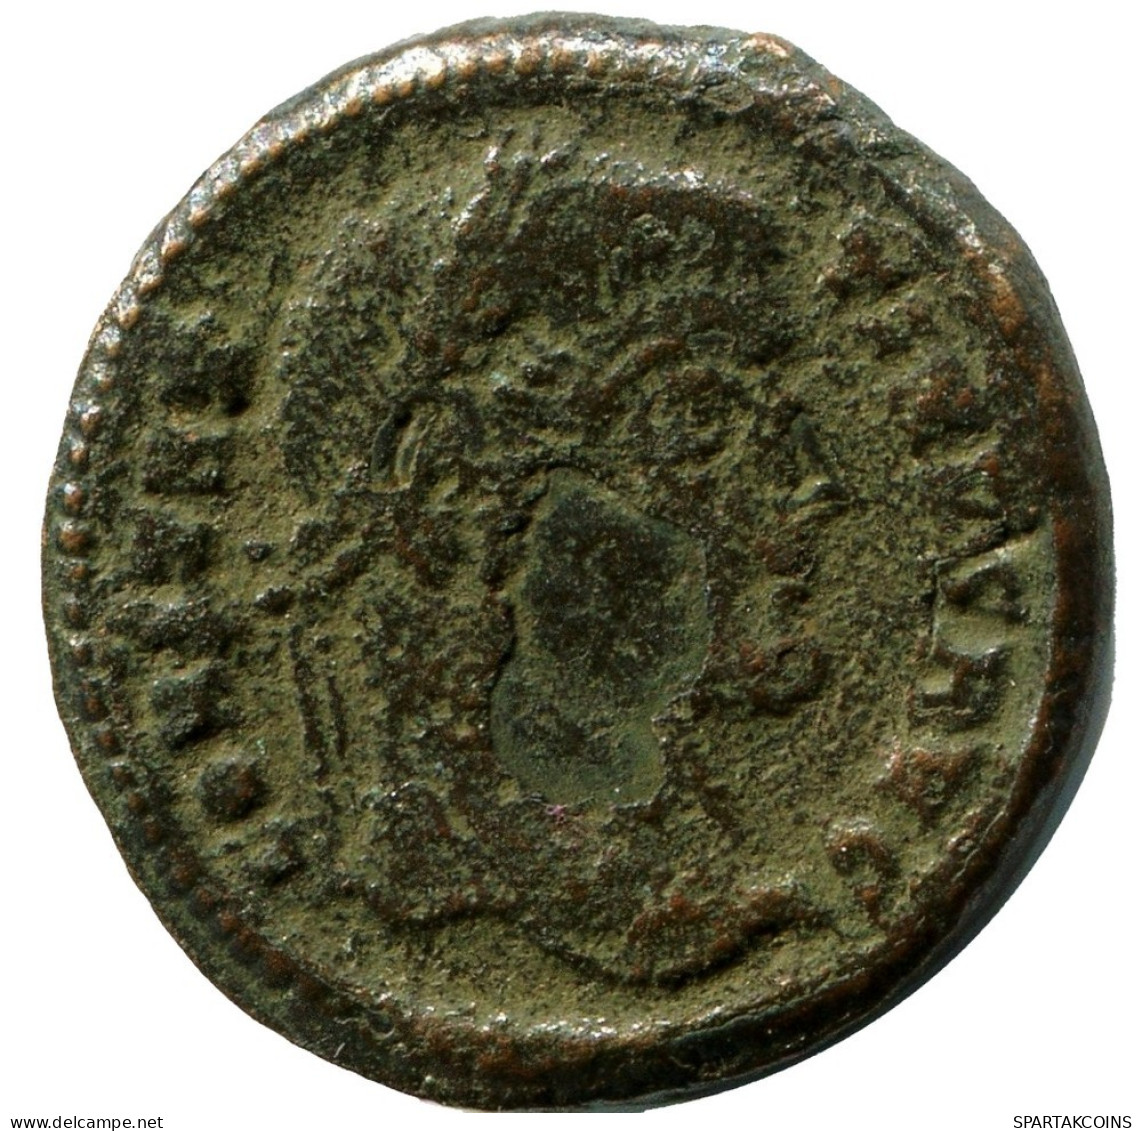 CONSTANTINE I MINTED IN CYZICUS FROM THE ROYAL ONTARIO MUSEUM #ANC10953.14.U.A - L'Empire Chrétien (307 à 363)